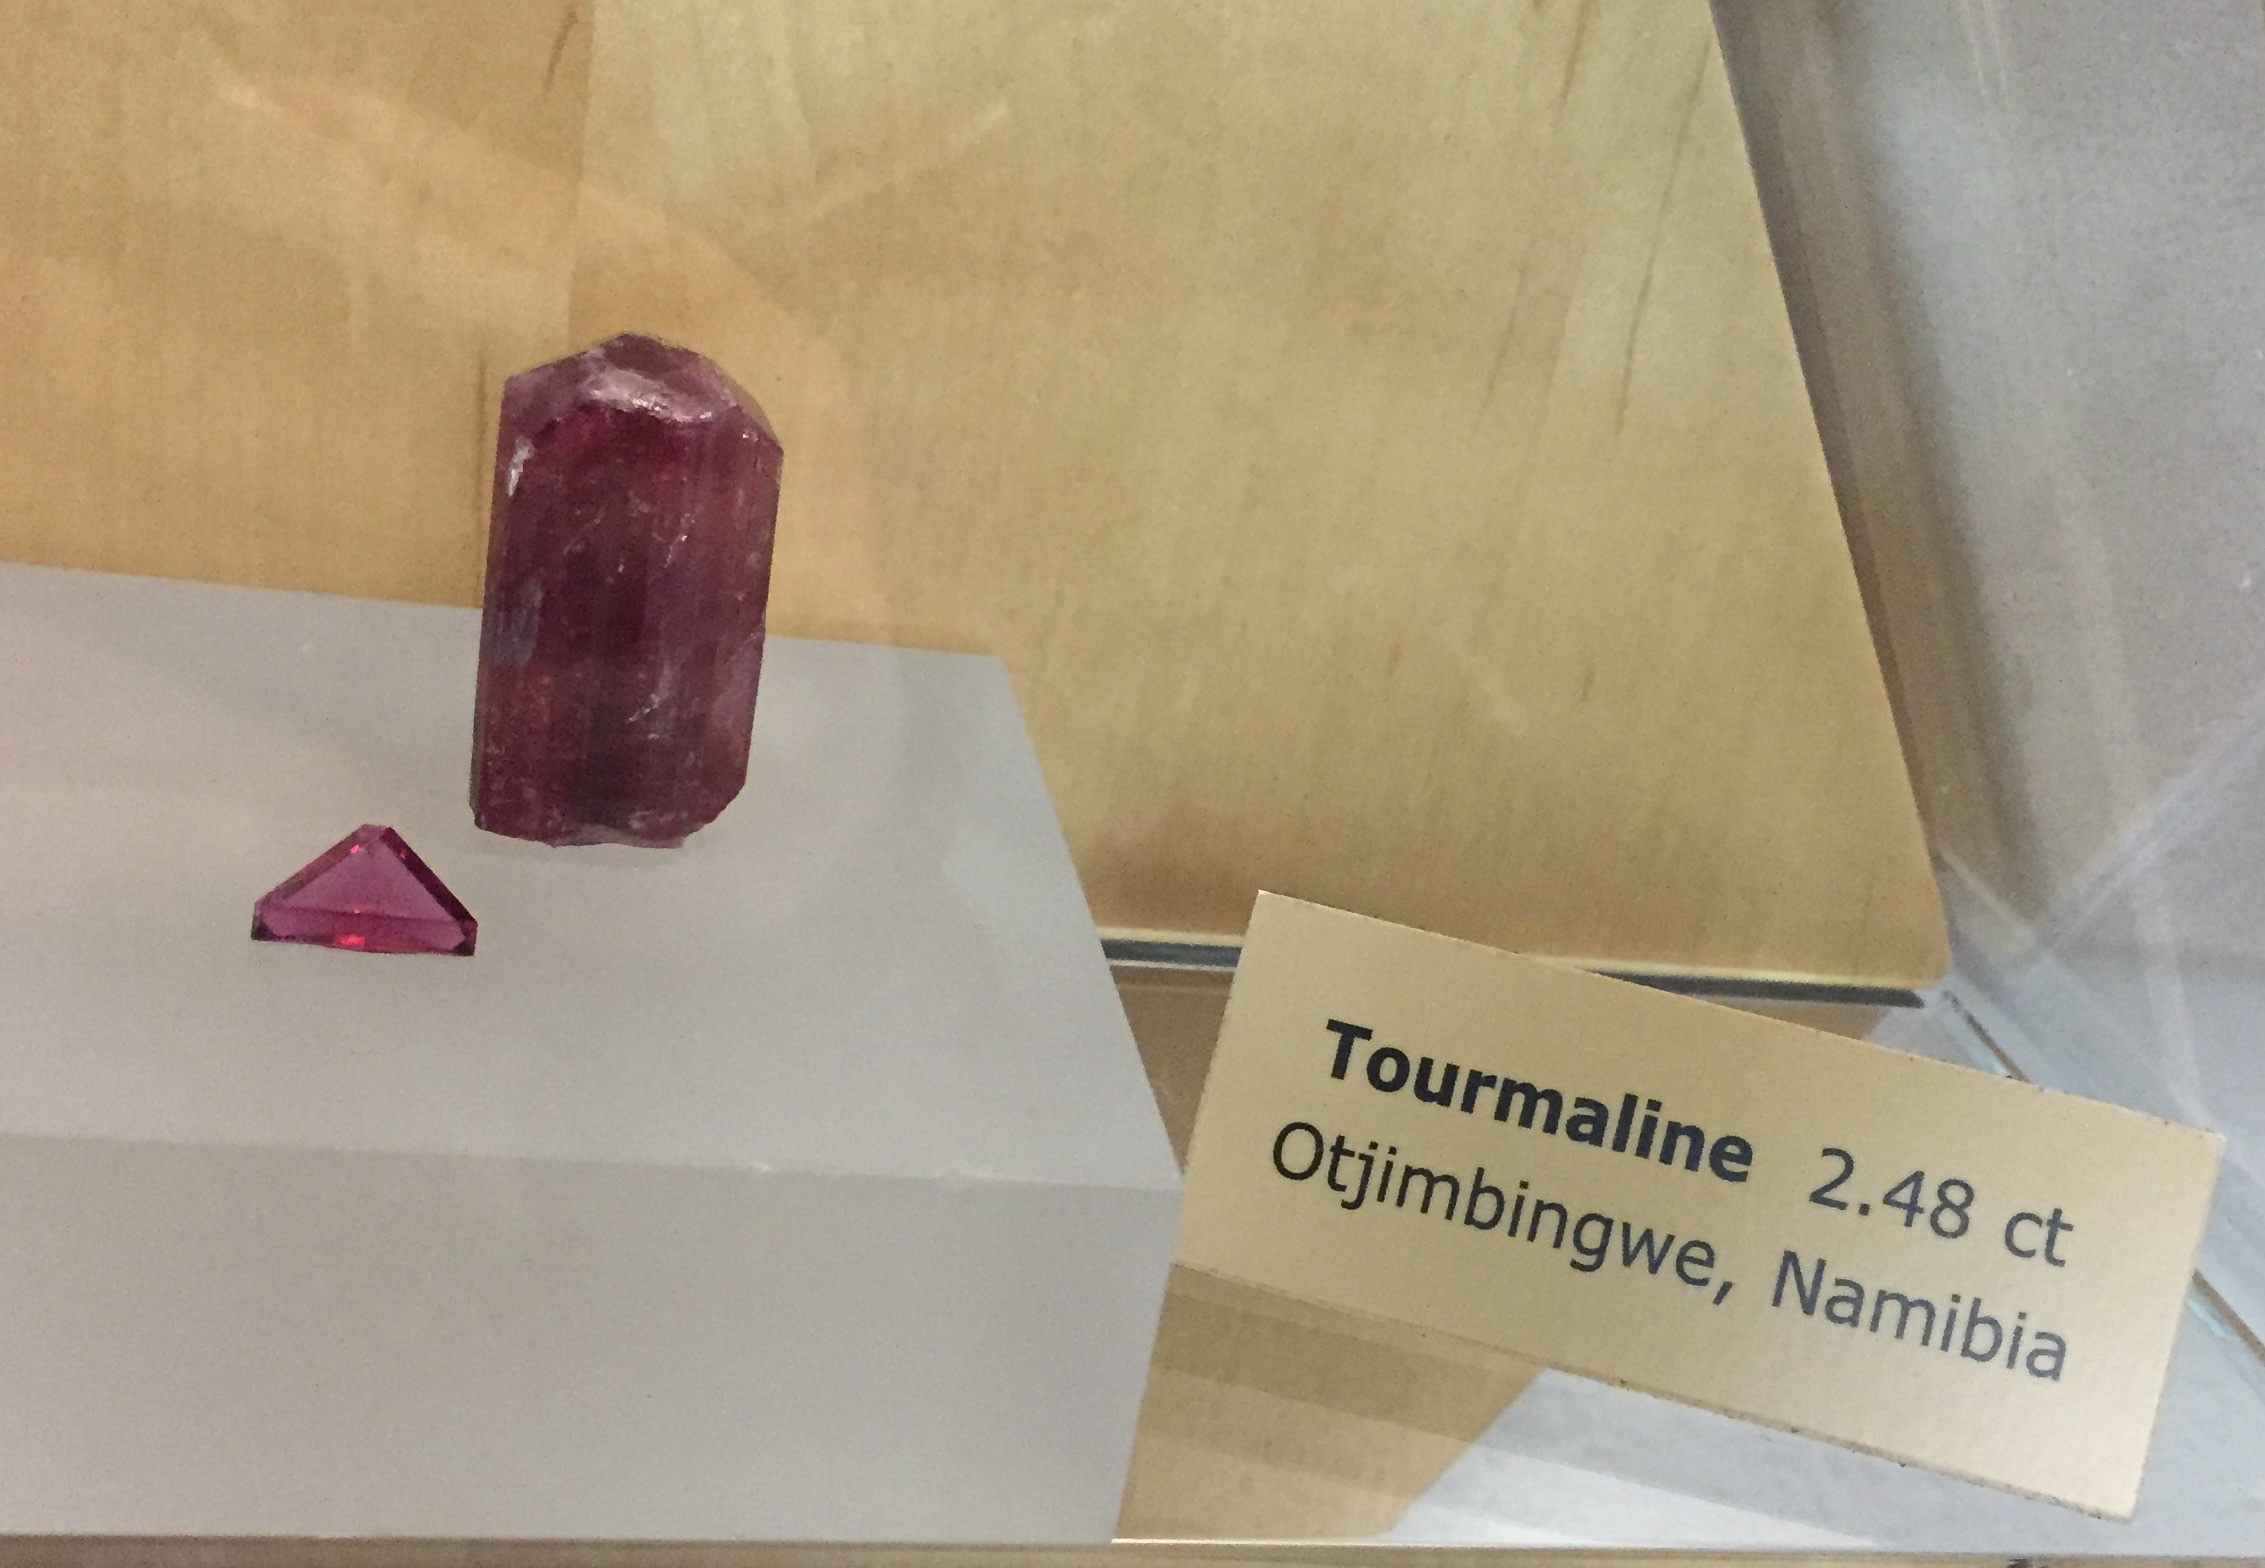 Tourmaline from AGS headquarters